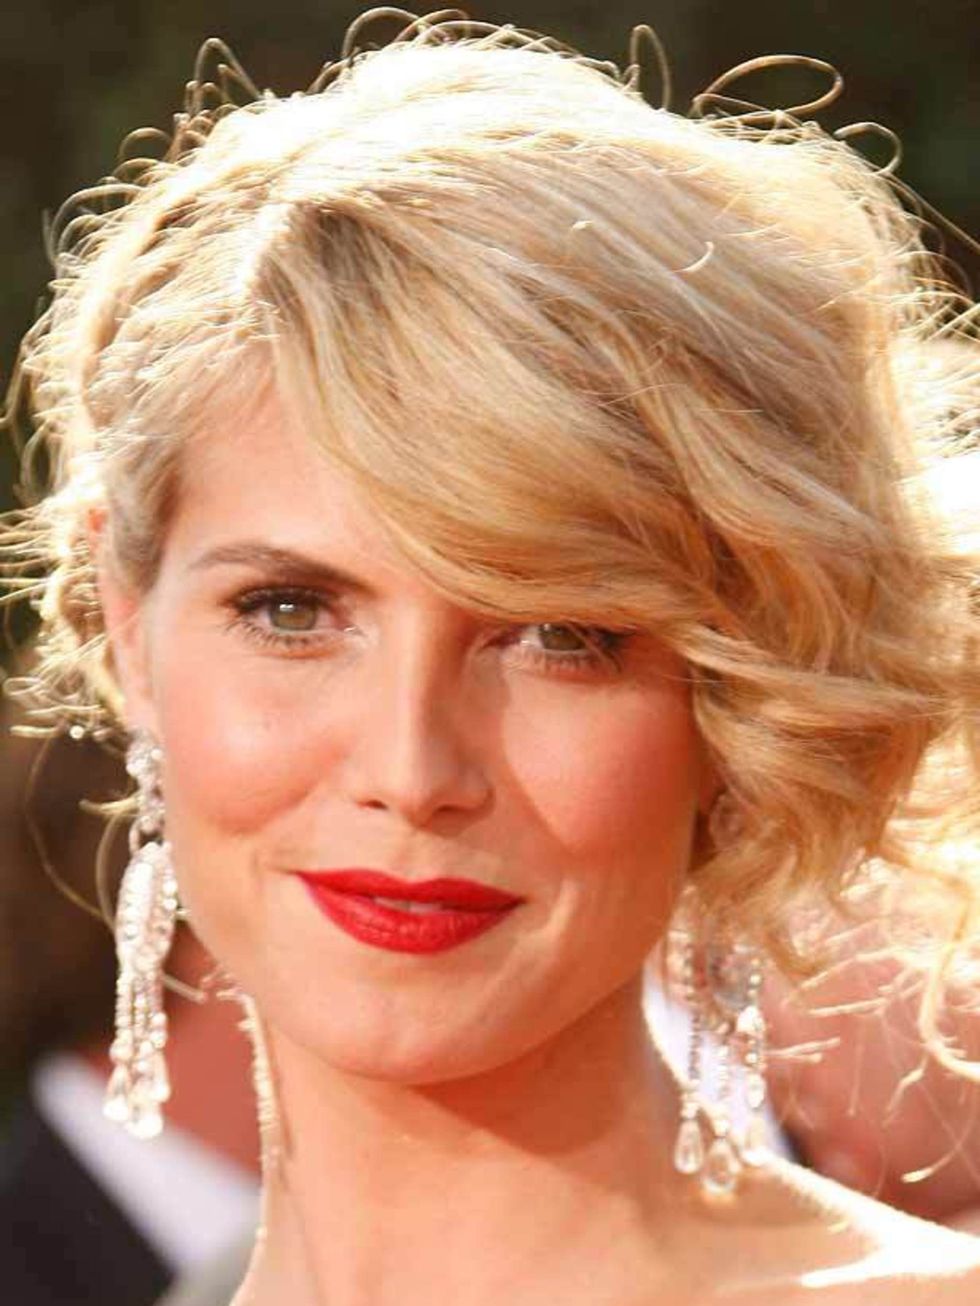 <p><a href="http://www.elleuk.com/horoscopes/celebs/gemini/heidi-klum">Click here to find out more about Heidi</a></p><p><a href="http://www.elleuk.com/beauty/beauty-trends/cloud-hair">Click here for more hair inspiration</a></p>